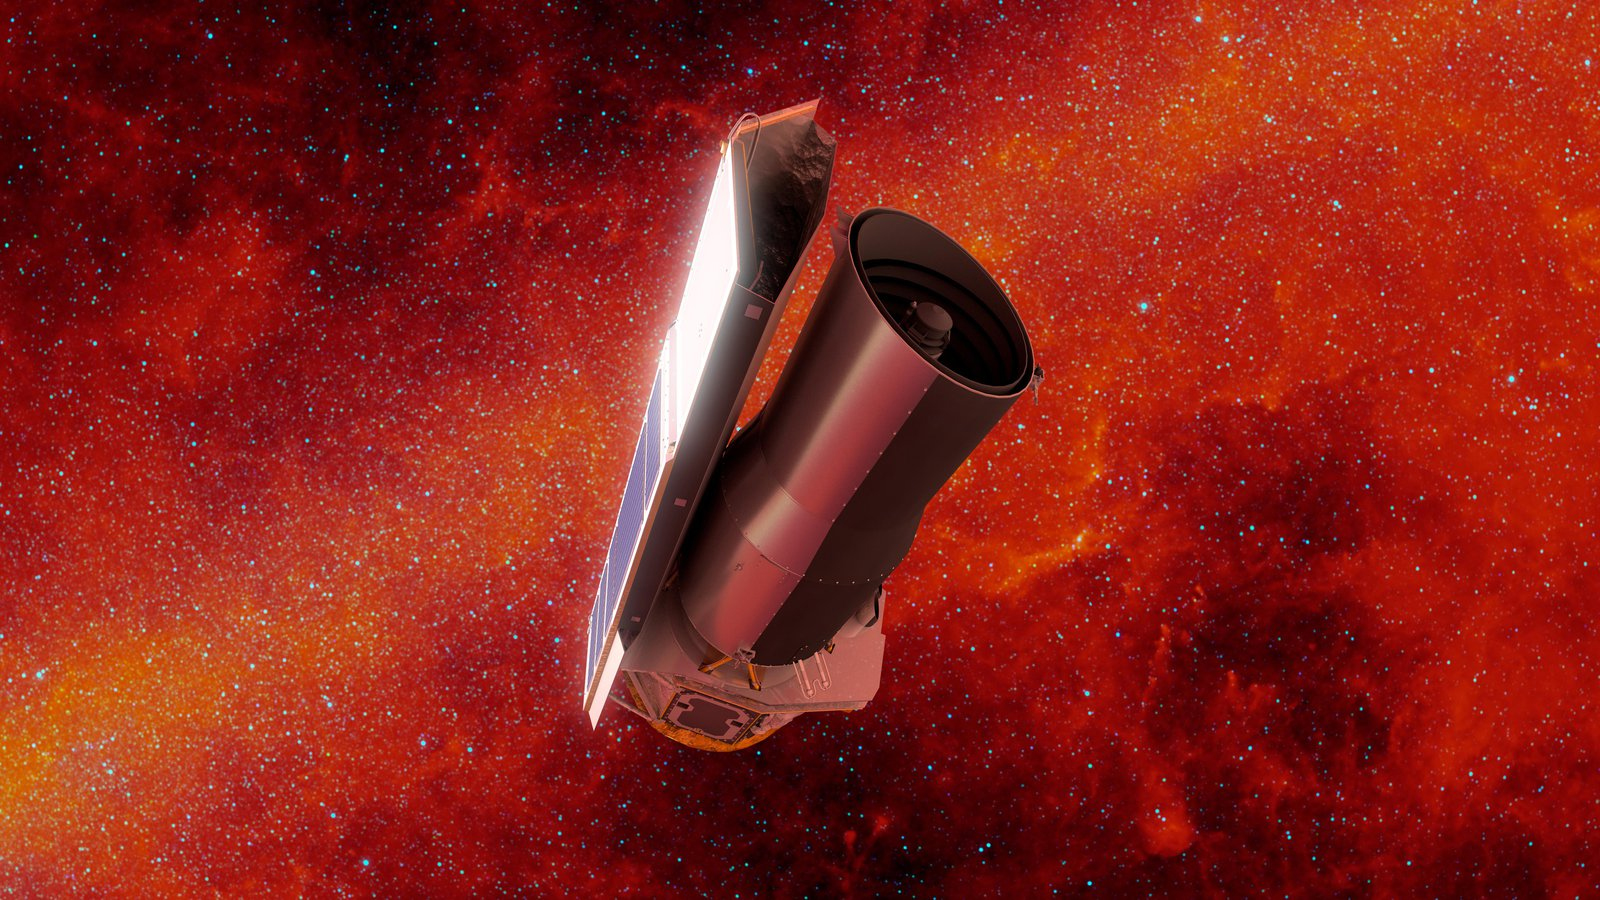 NASA’s Spitzer Space Telescope could be coming out of retirement